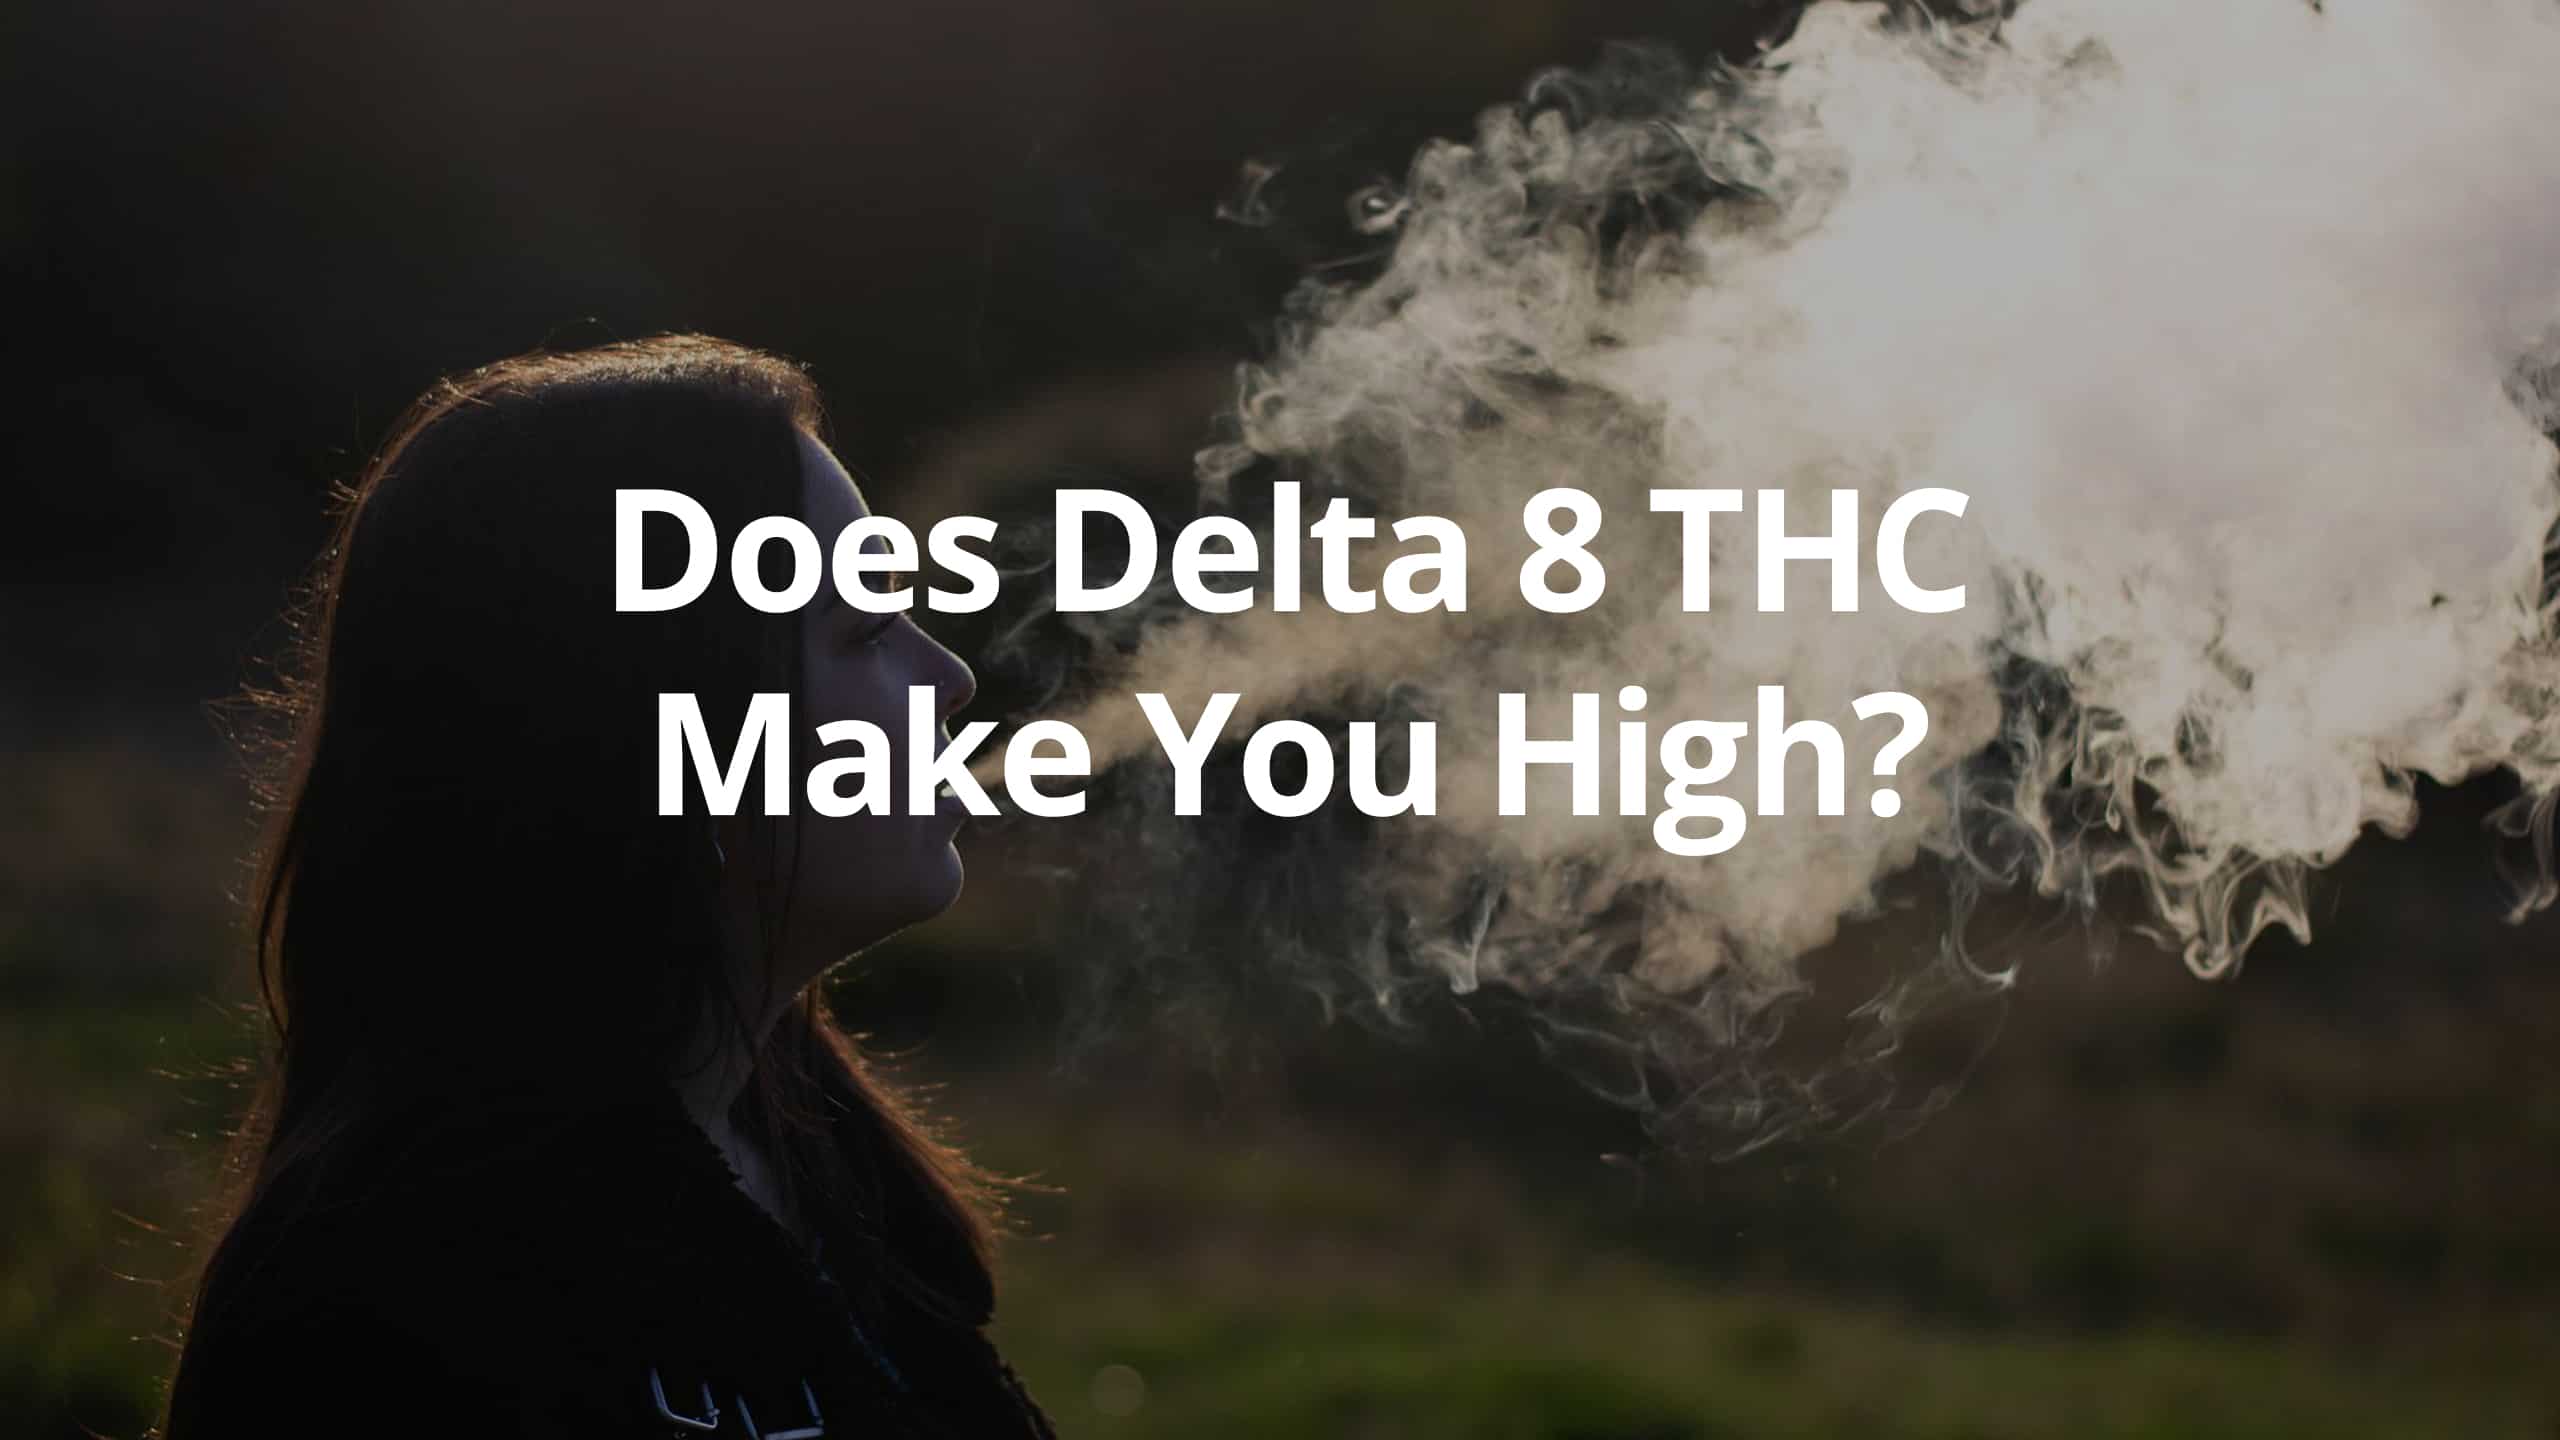 Does Delta 8 THC Make You High?